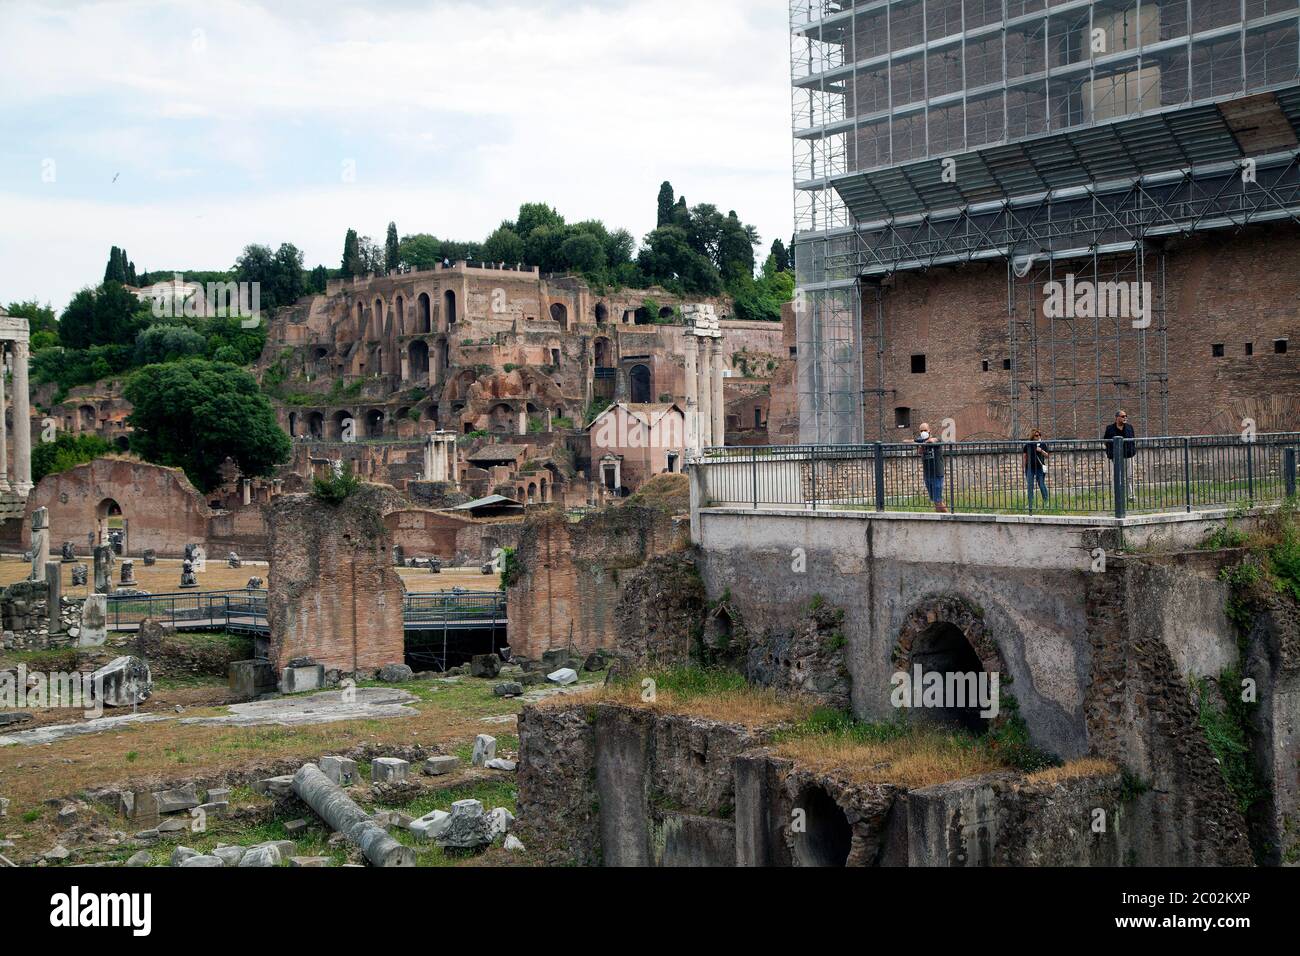 Still few tourists in Rome after Covid19 lockdown. People wearing a protective face mask visits Fori Imperiali Area in Rome, Italy, on Tuesday, June 02, 2020. Stock Photo